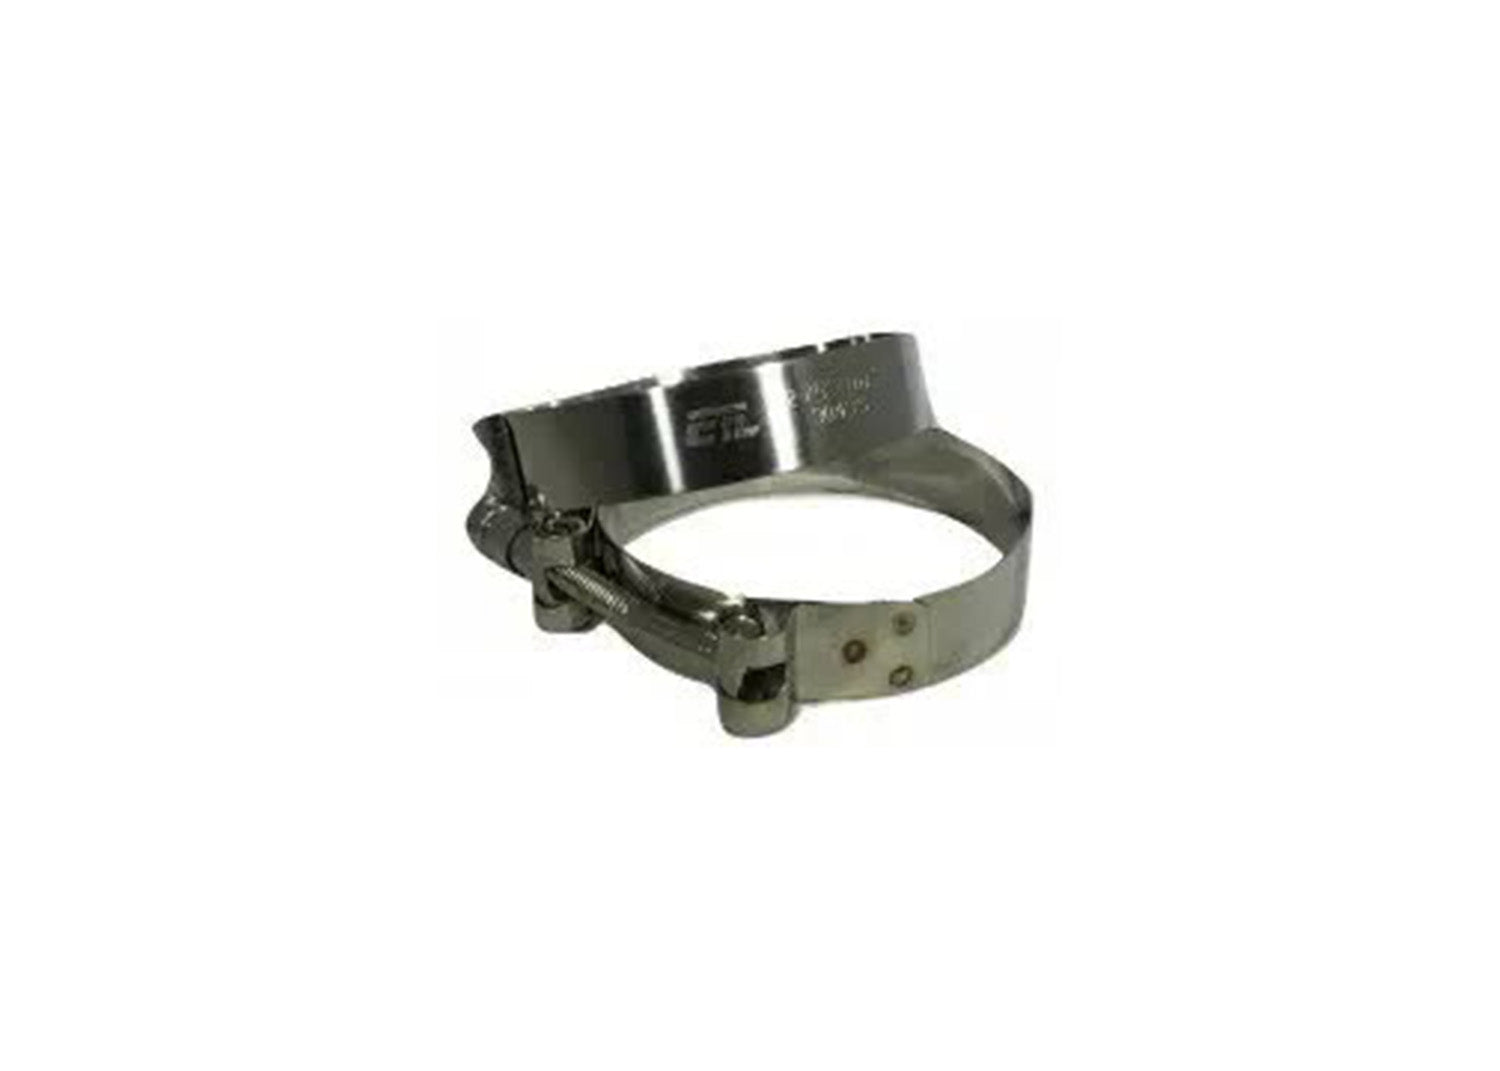 T-Bolt Clamp for use with 2.25" or 2.50" Inside Diameter Hose Couplings Part Number 221006